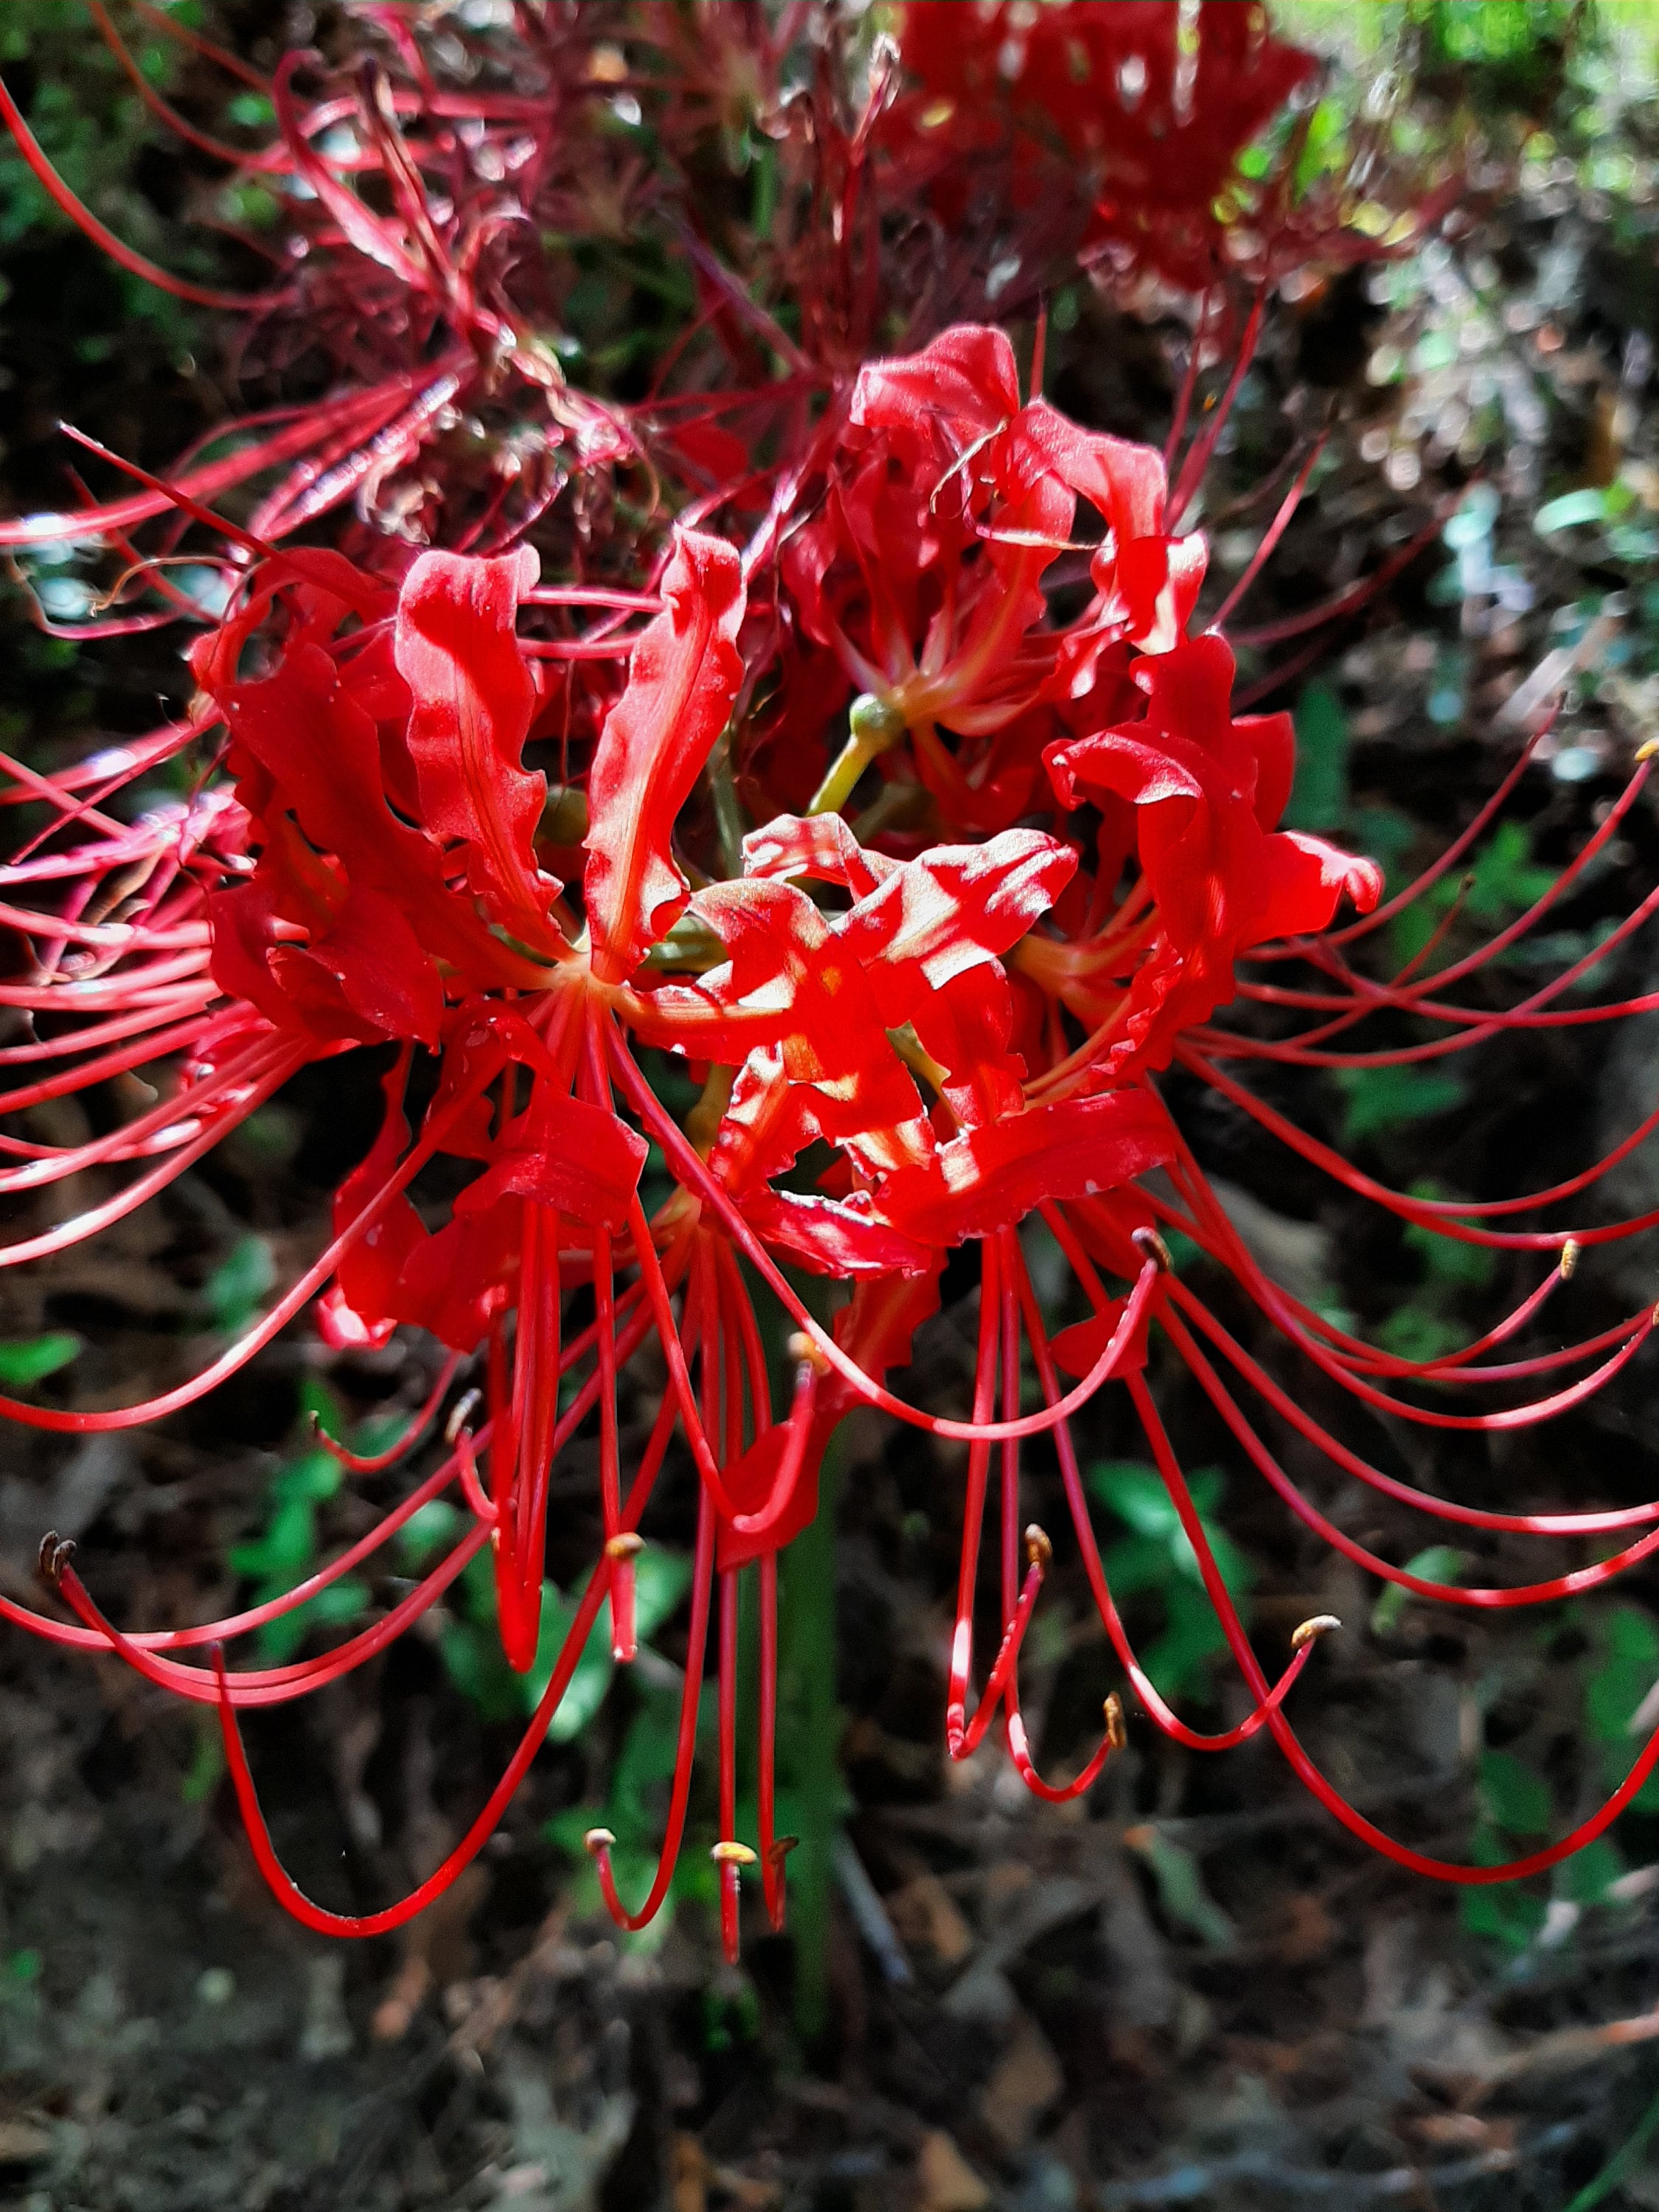 How to use red spider lilies in the garden?